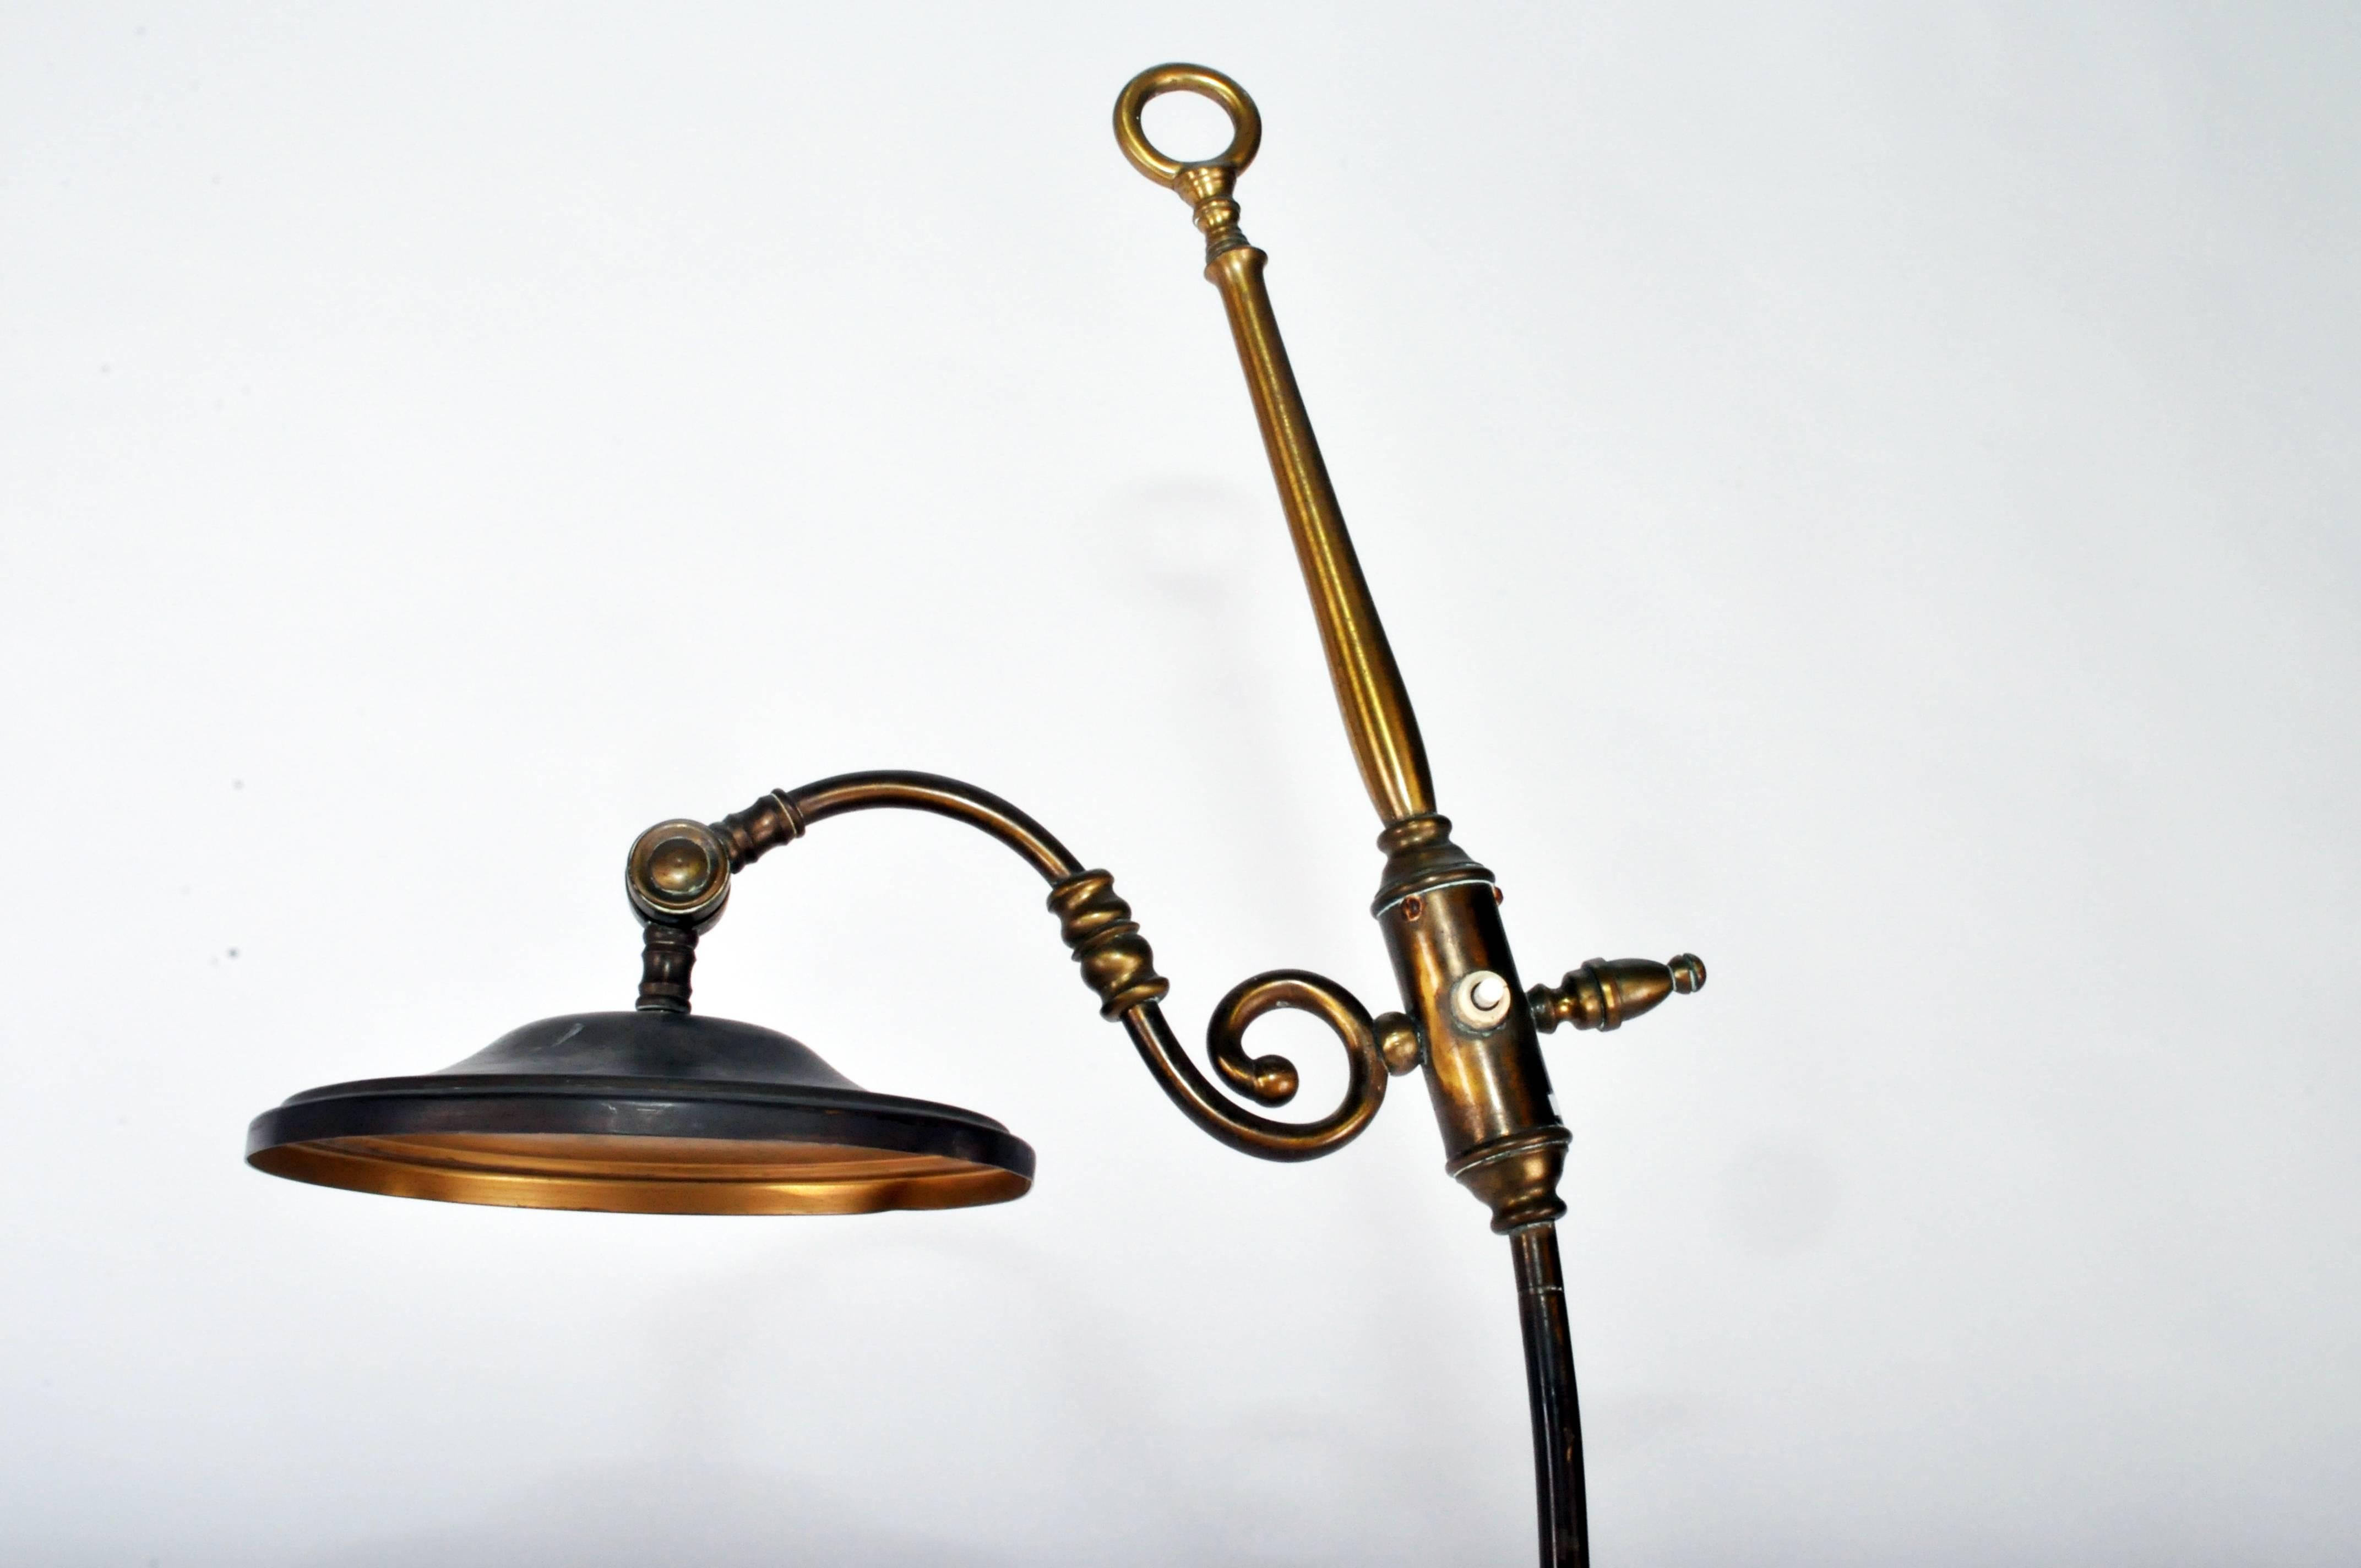 This vintage brass floor lamp is from France, circa 1900.